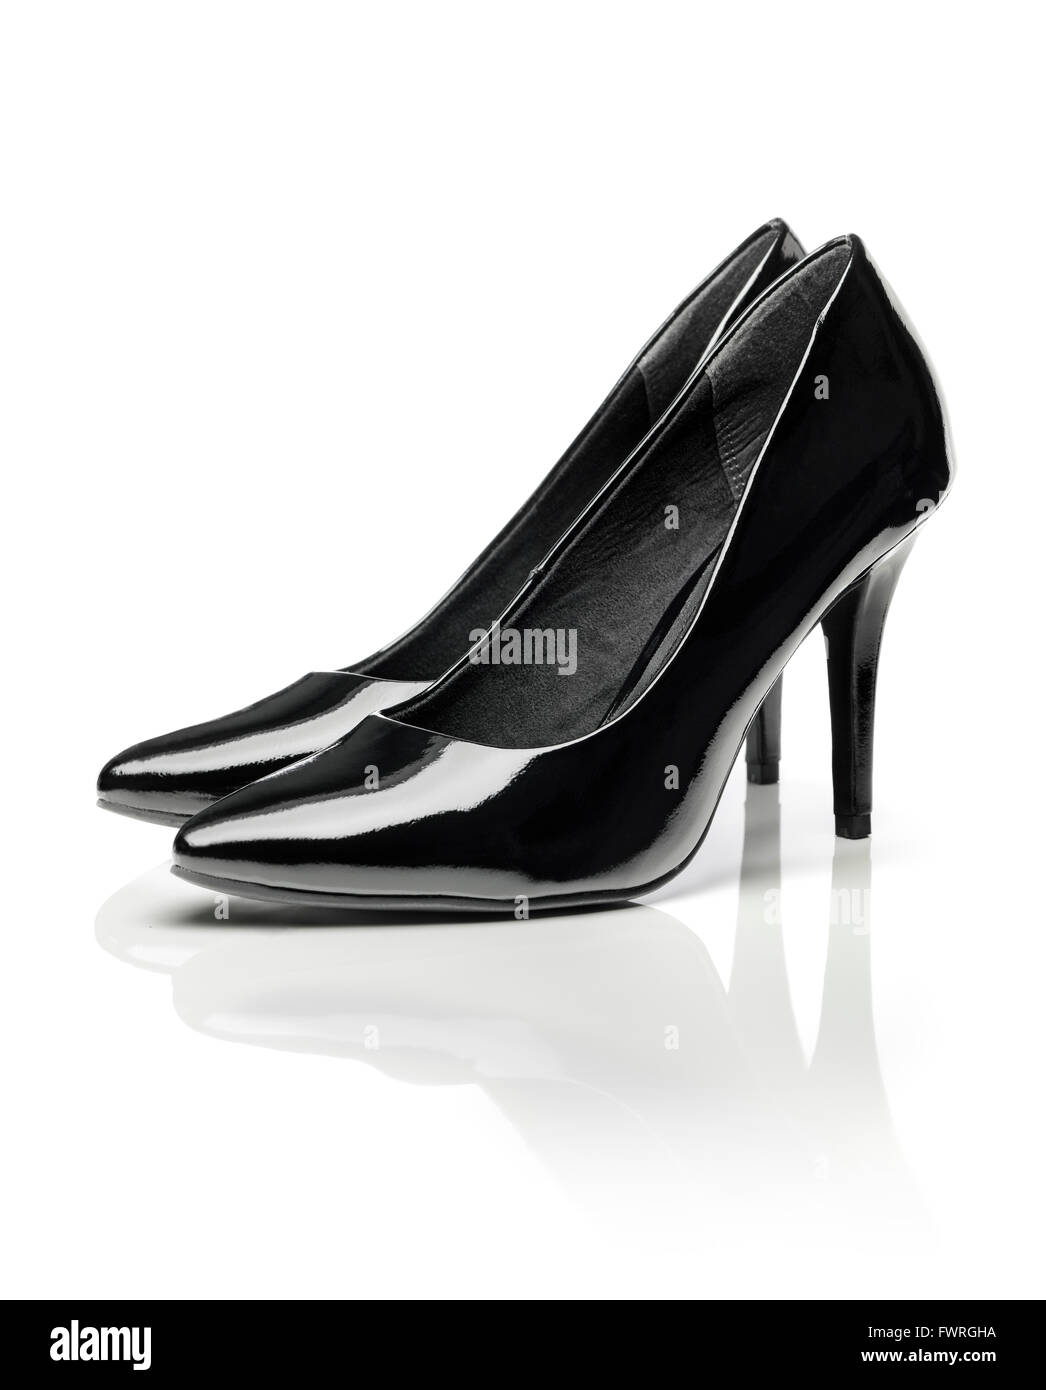 Black shiny patent leather stiletto heel pumps isolated on white with natural reflection. Stock Photo